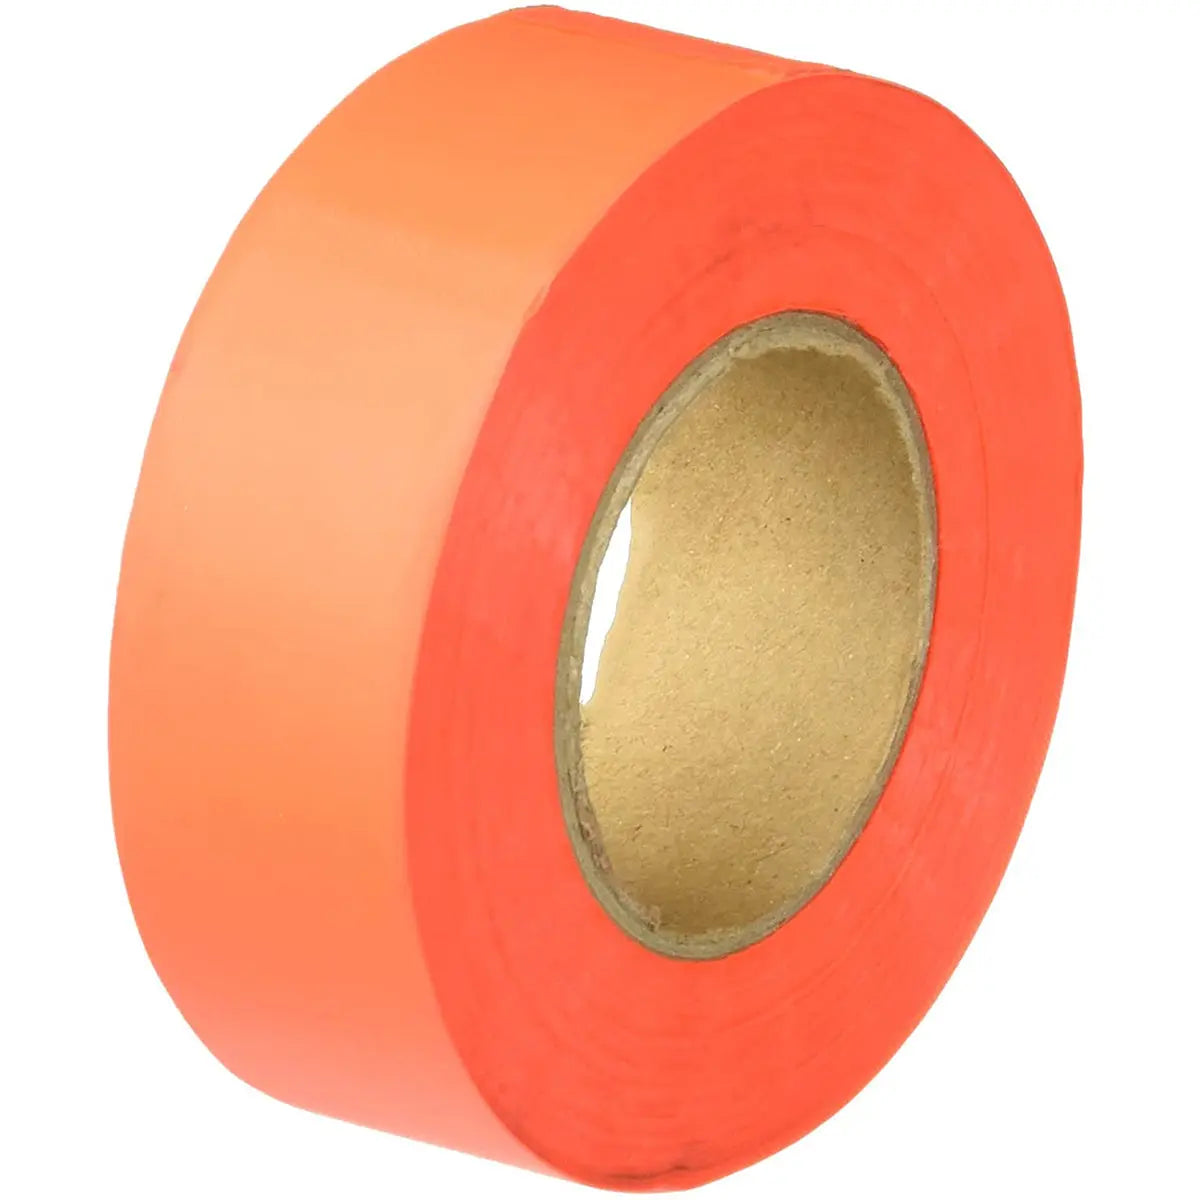 Coghlan's Orange Trail Tape 1 in x 150 ft, Bright Easy to See Marking Ribbon Coghlan's